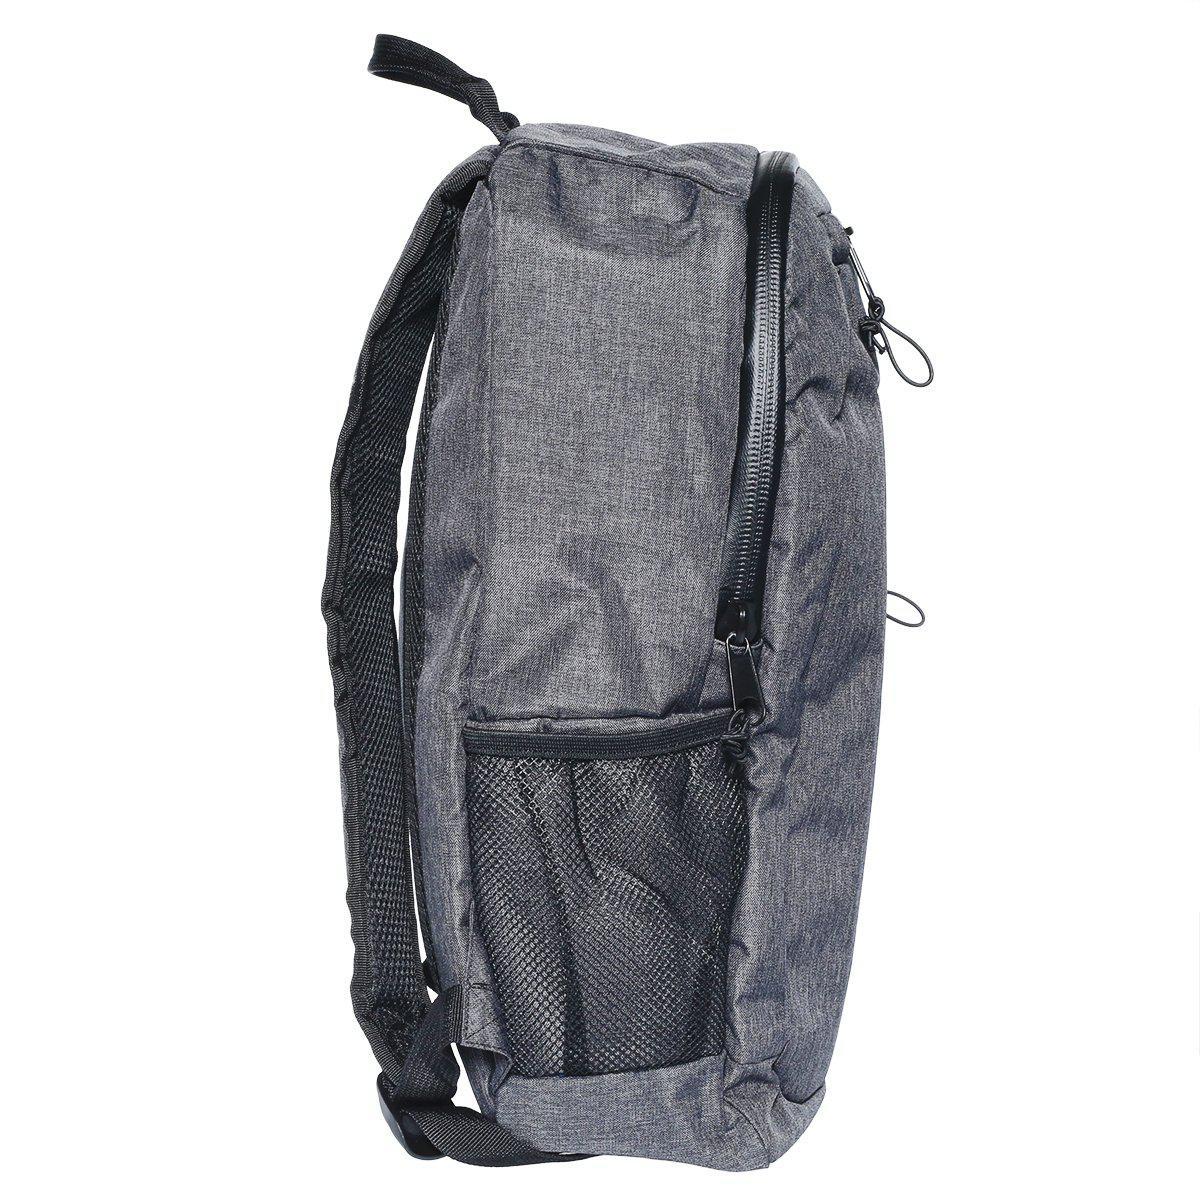 Skunk Bags Smell Proof Backpack